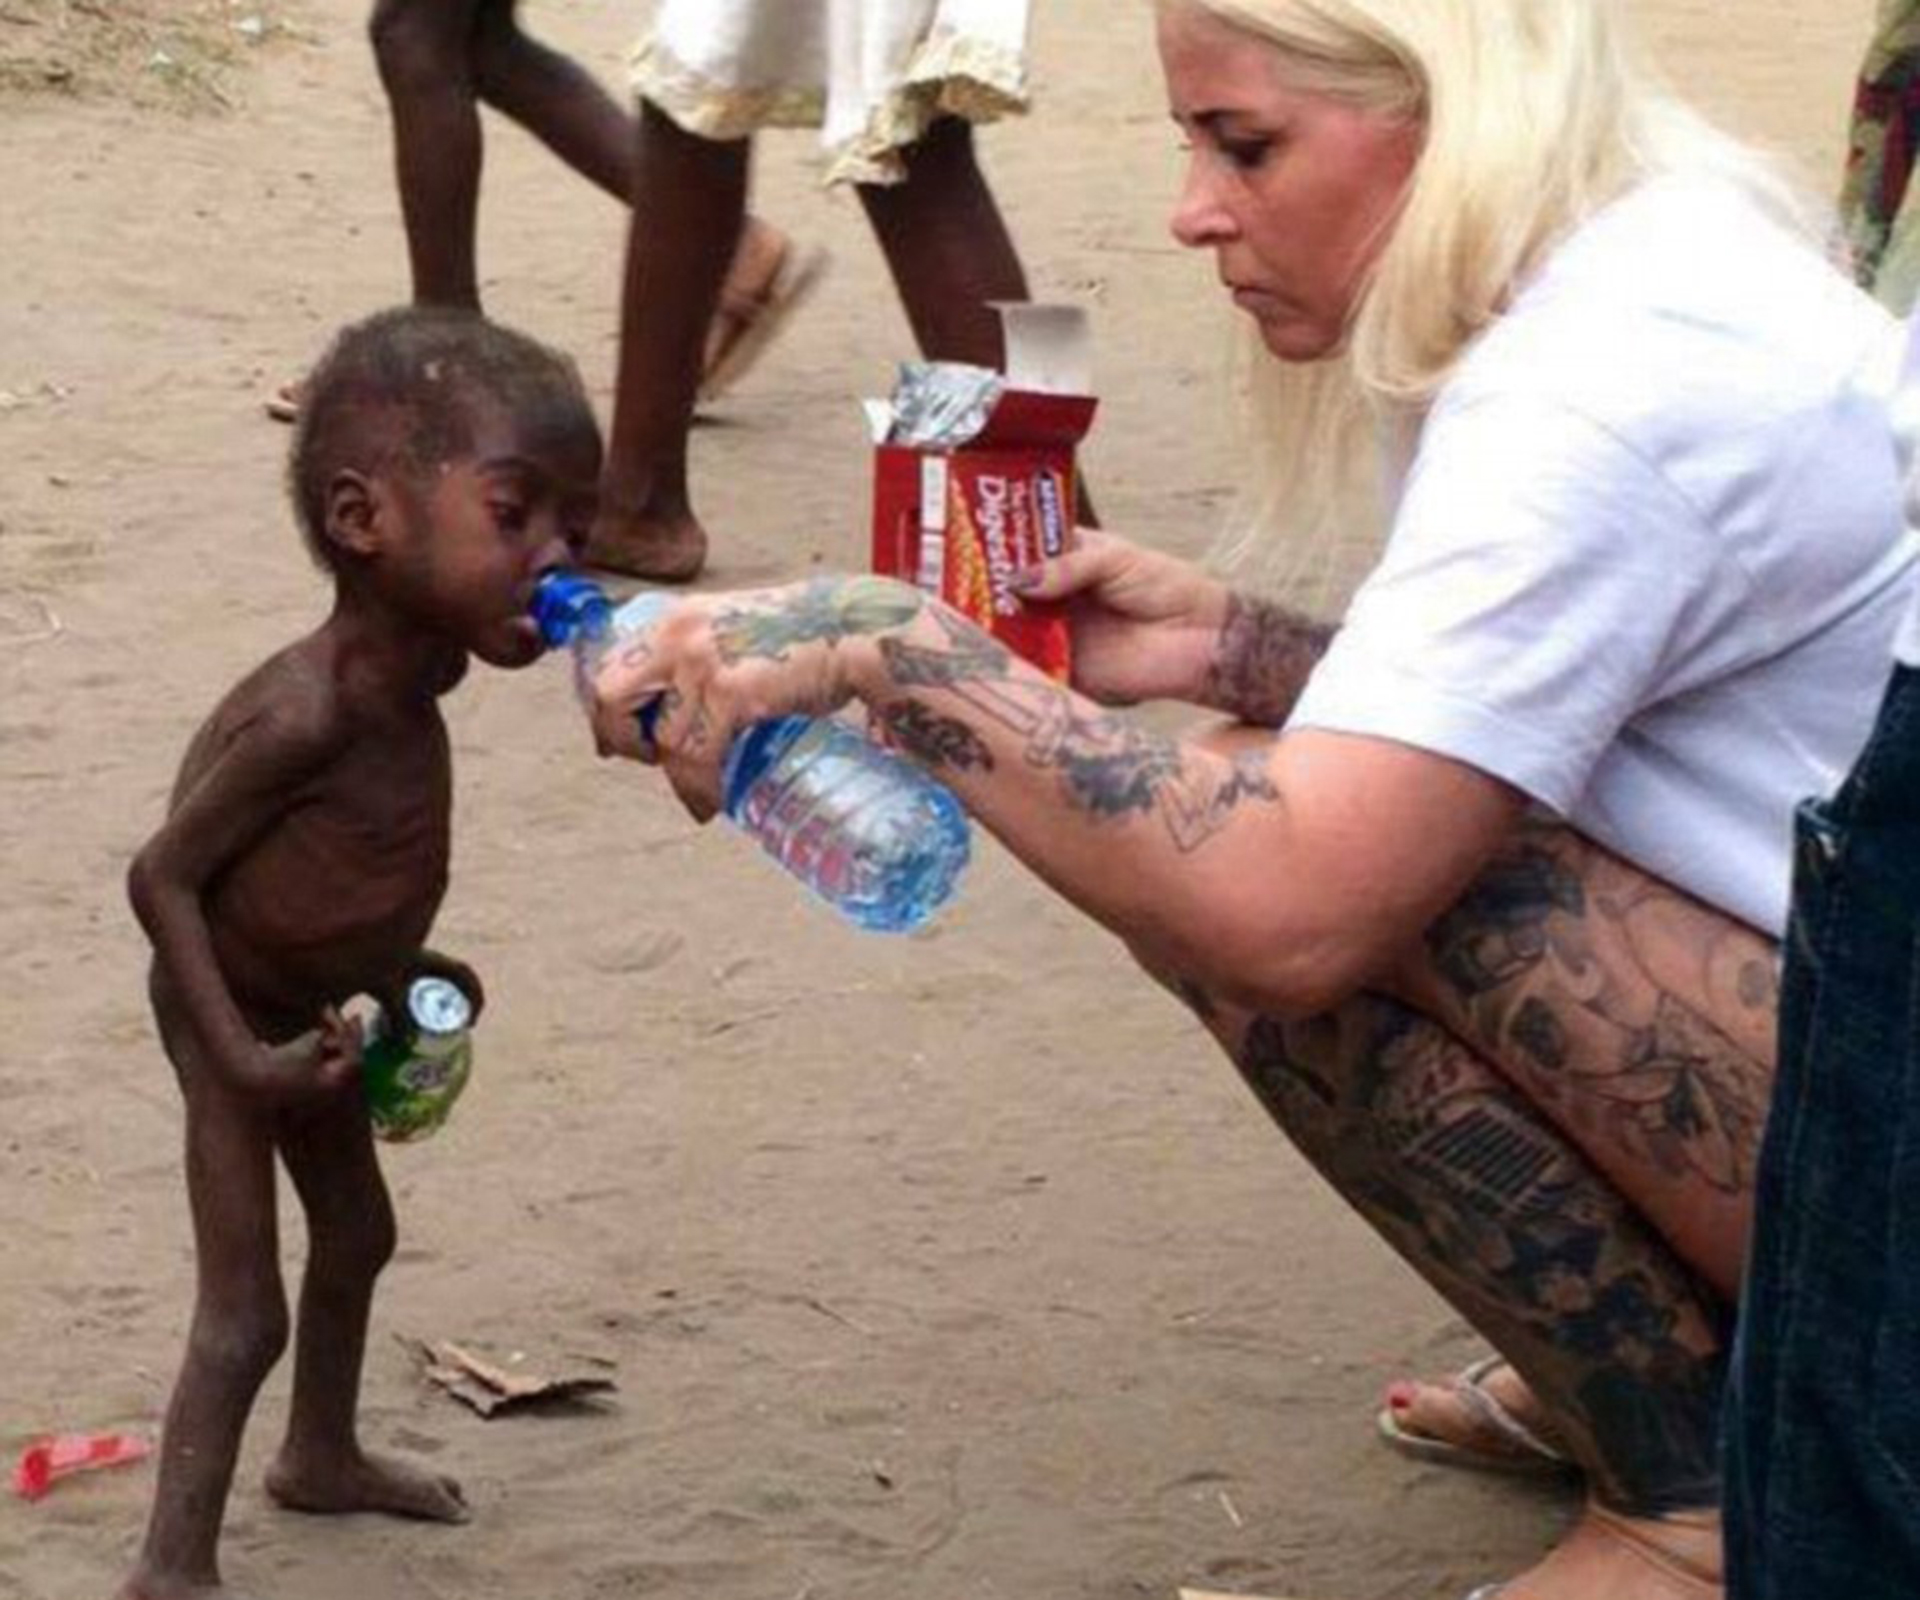 The heartbreaking photo of an aid worker feeding a child left to die